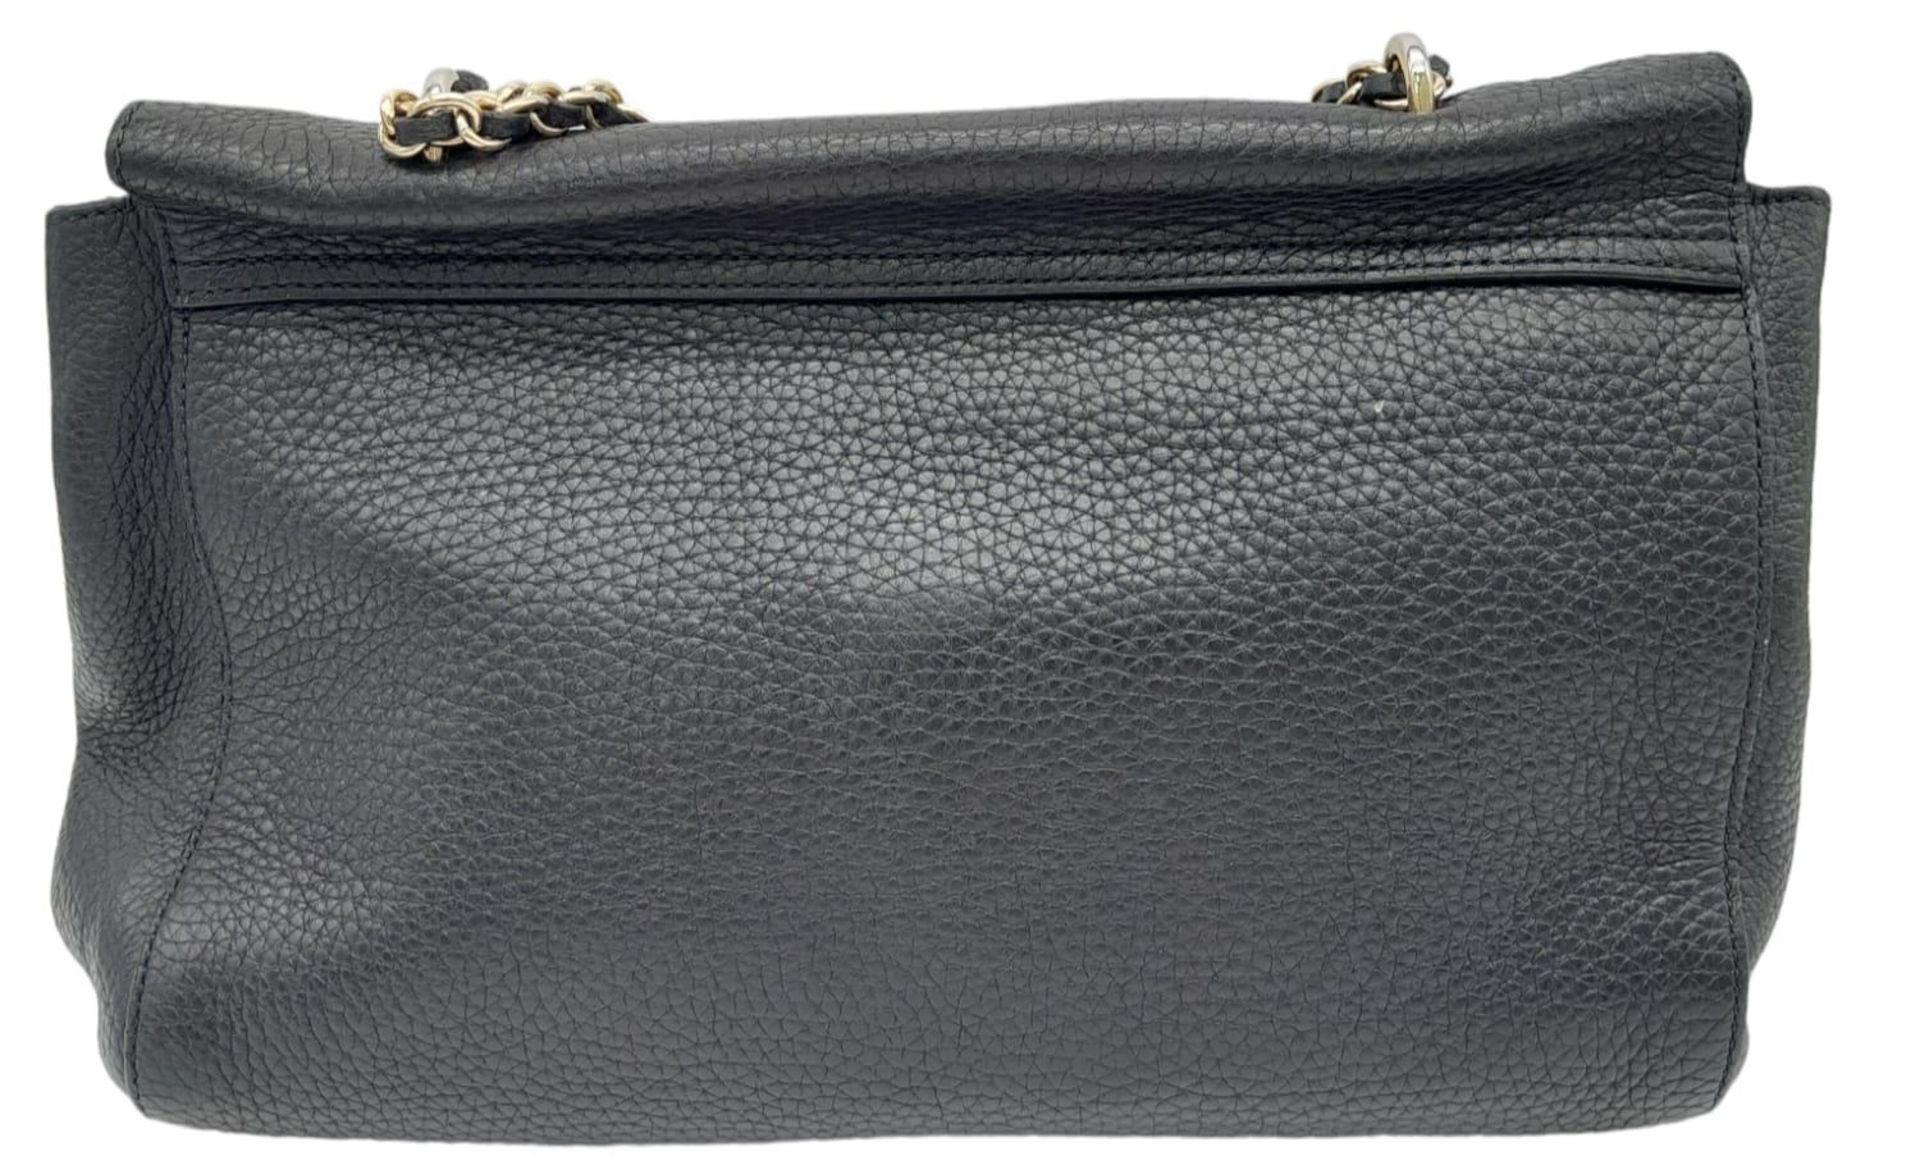 A Black Mulberry Lily Bag. With a Classic Grain Leather, Flap Over Design, Signature Postman Style - Image 2 of 10